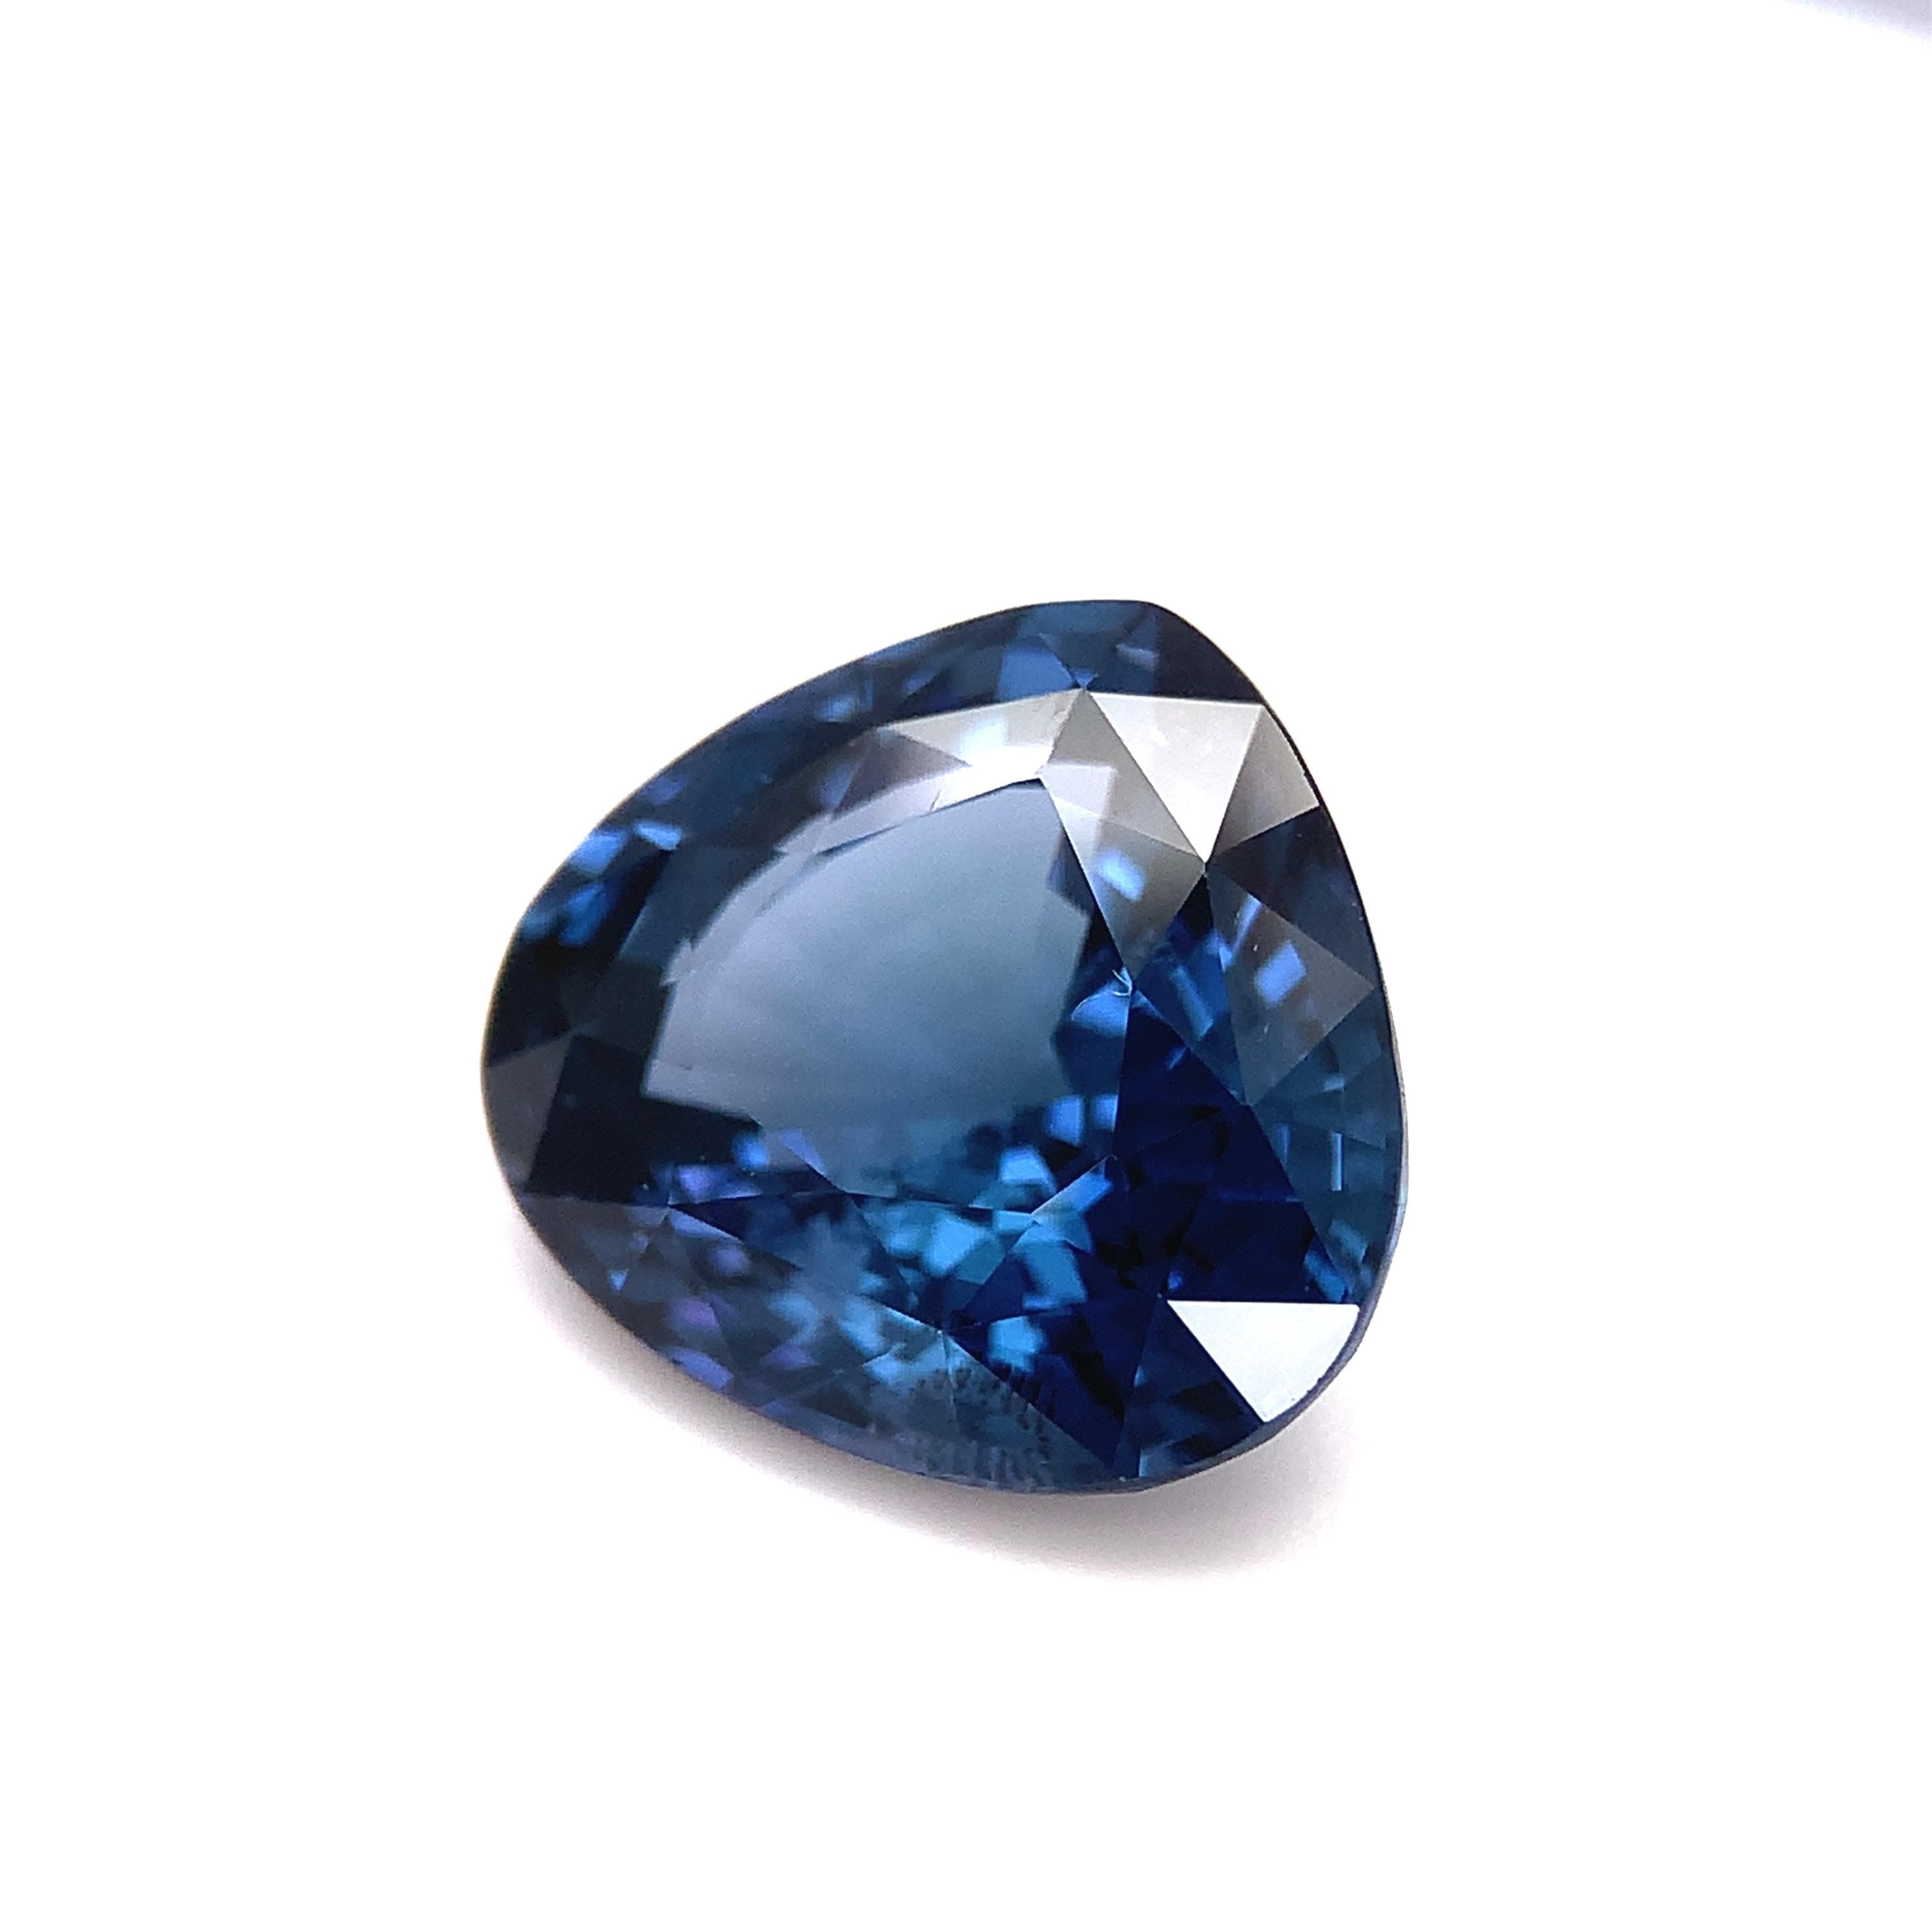 Artisan Unheated 5.02 Carat Blue Spinel, Loose Gemstone, GIA Certified ..... A For Sale